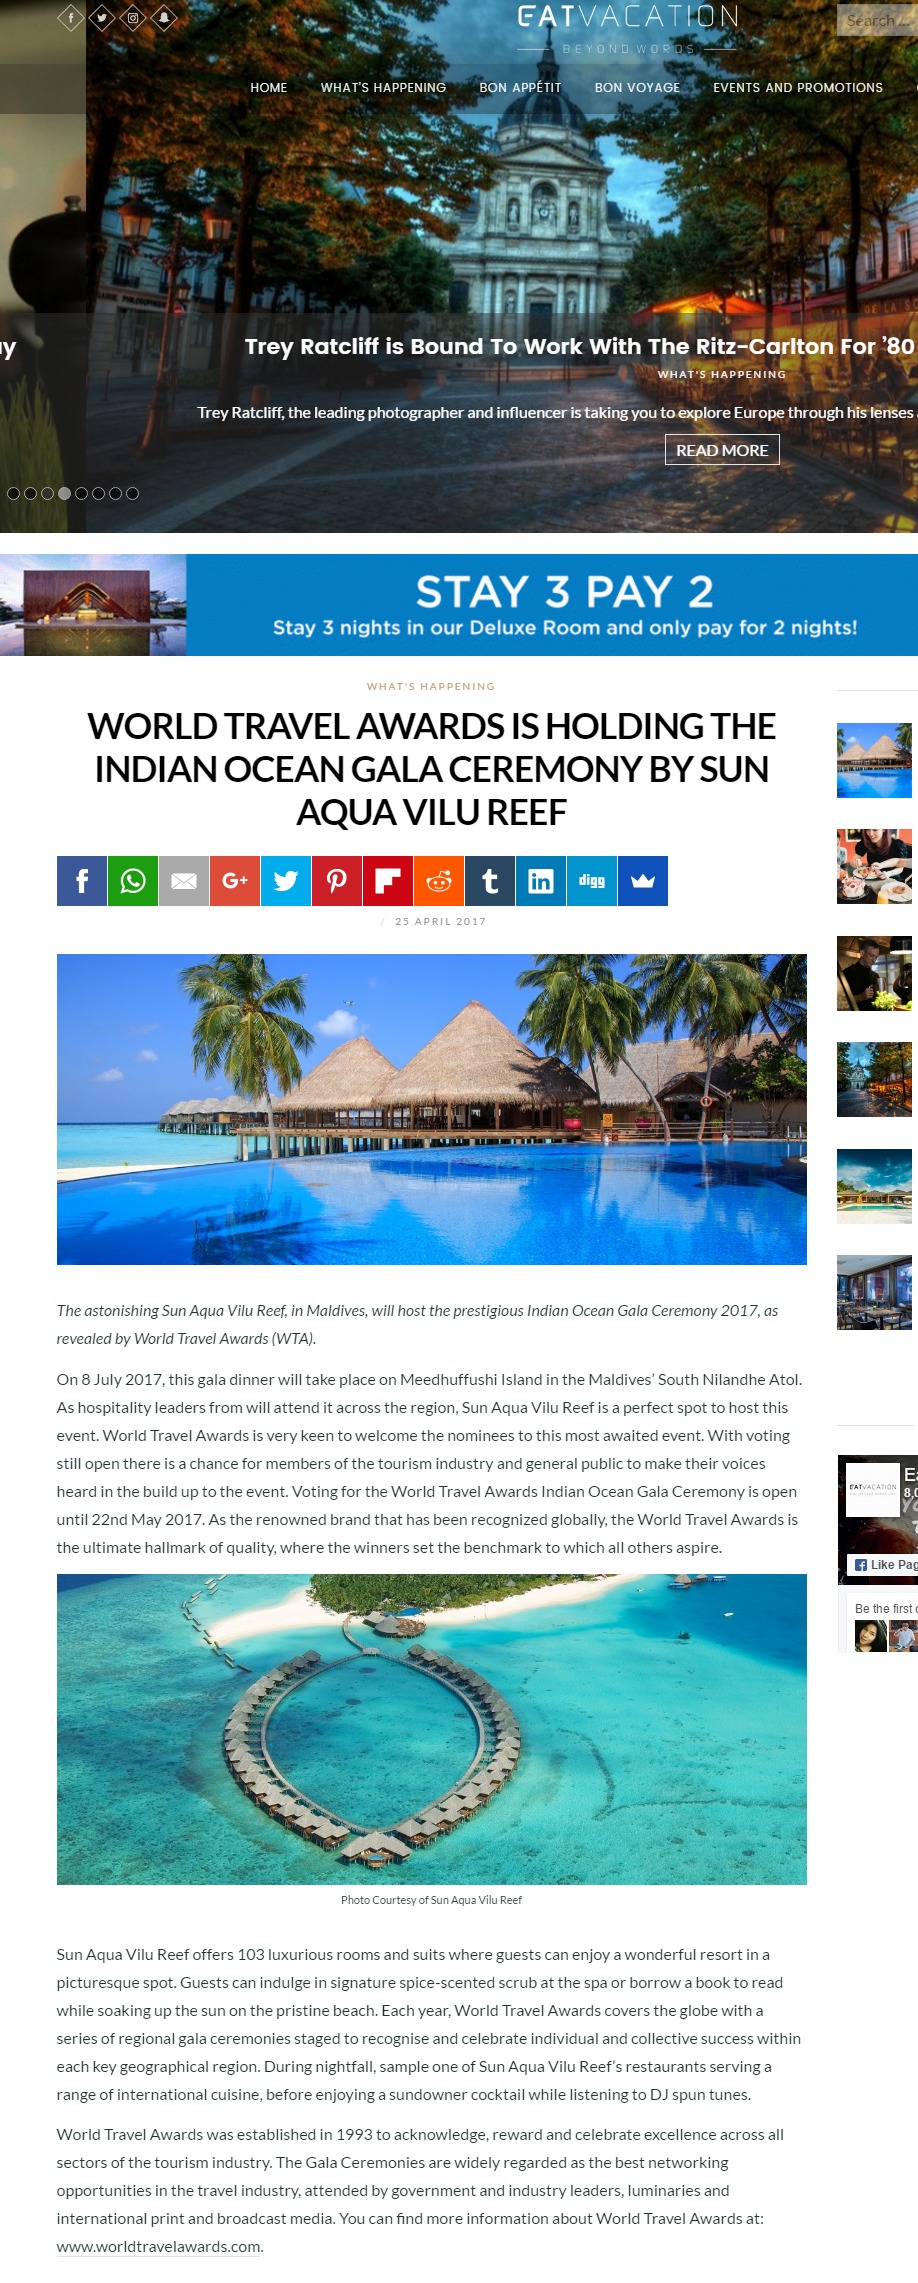 World Travel Awards is holding the Indian Ocean Ceremony by Sun Aqu Vilu Reef